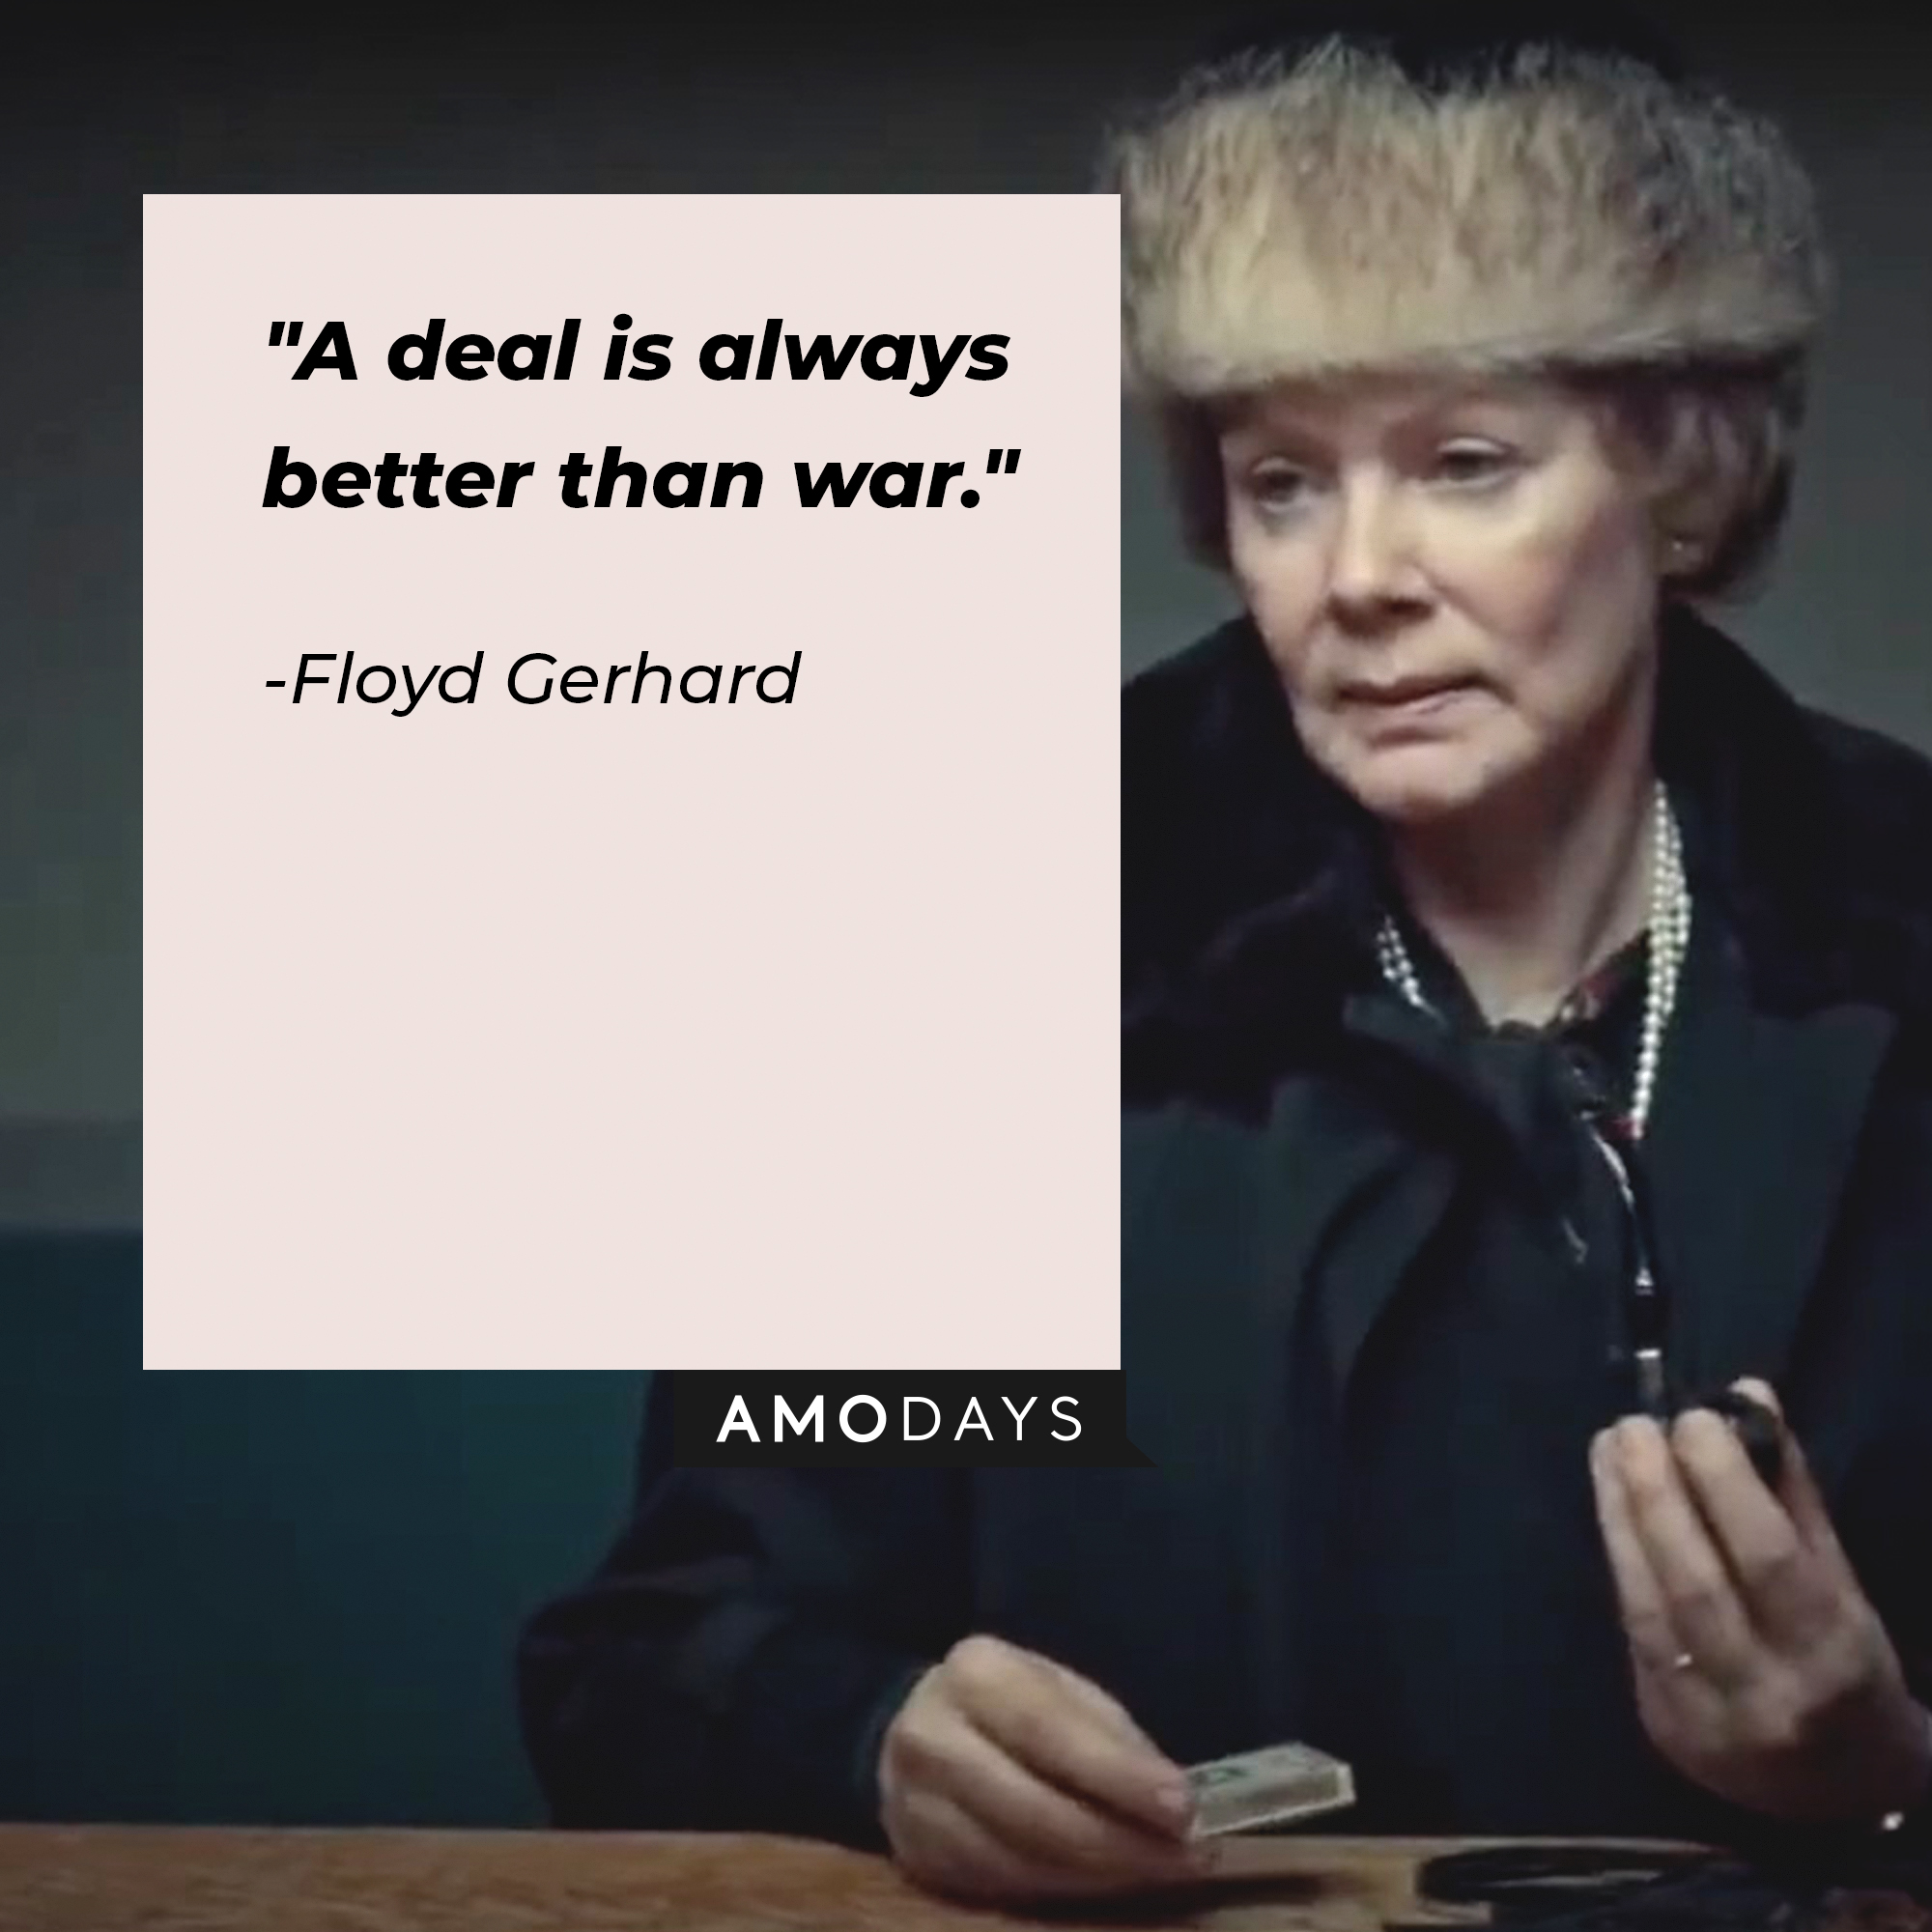 Floyd Gerhard, with her quote: "A deal is always better than war." |Source:   youtube.com/Netflix